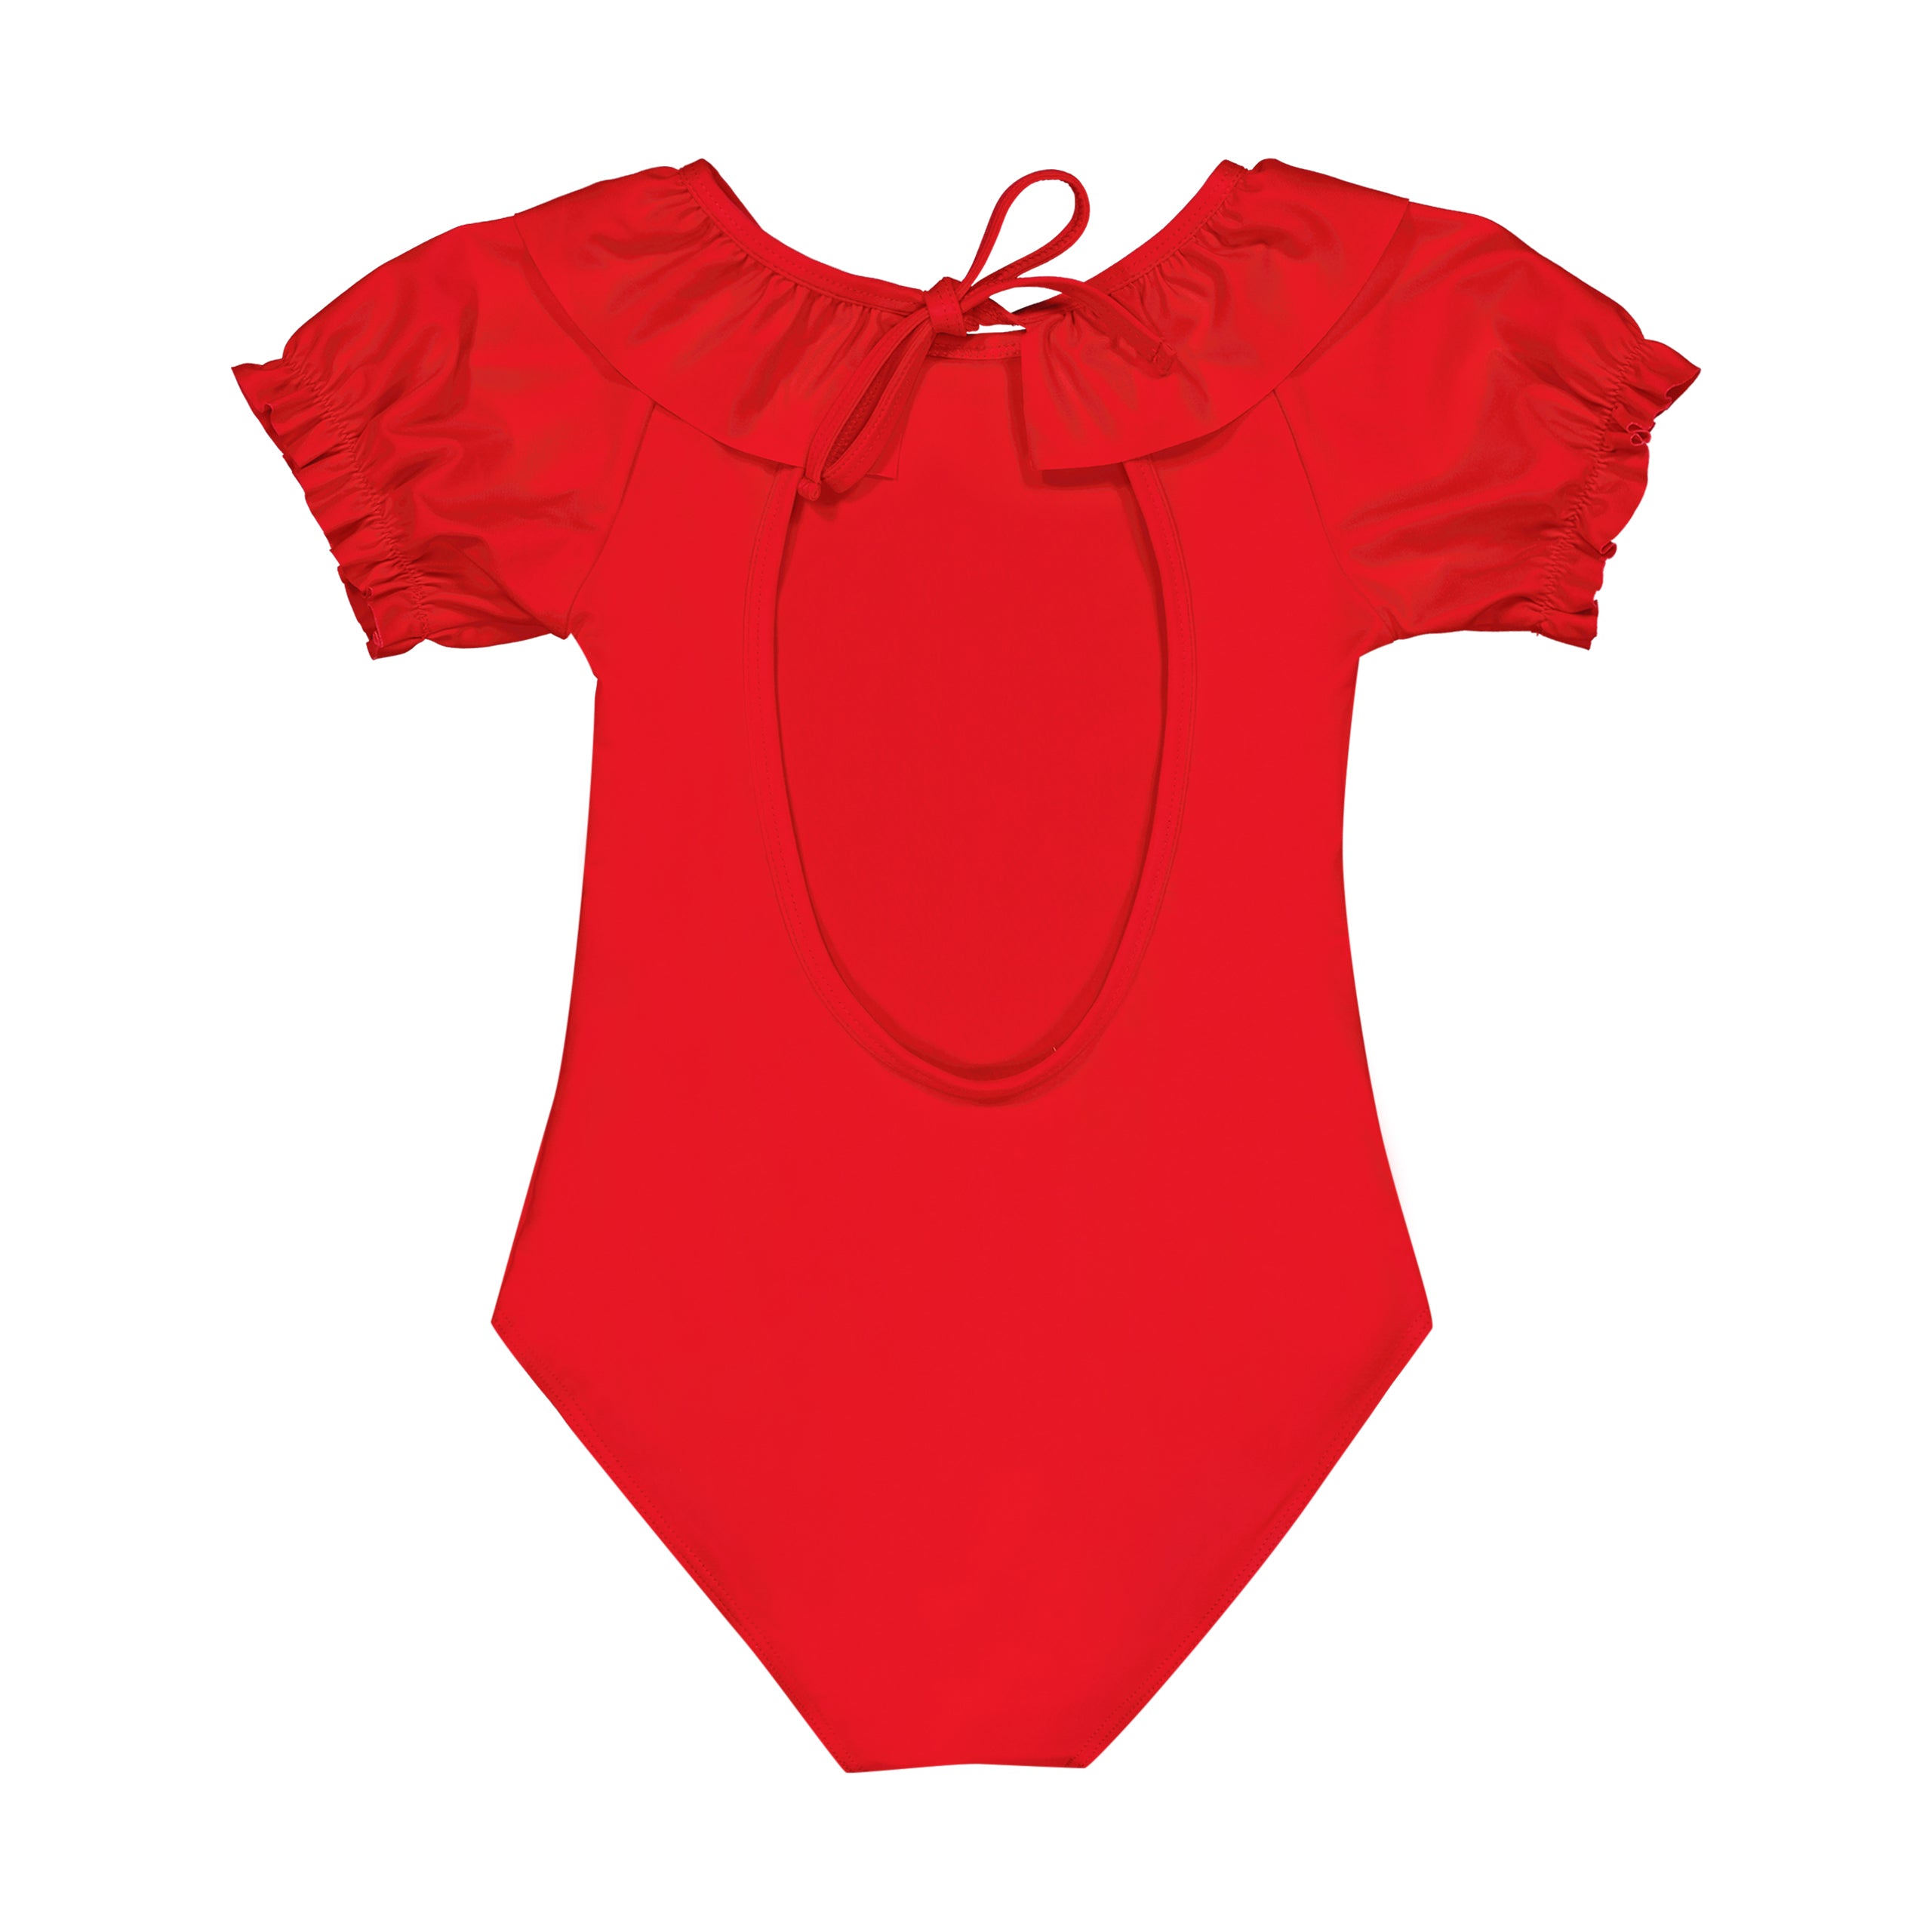 Girls Red Swimsuit